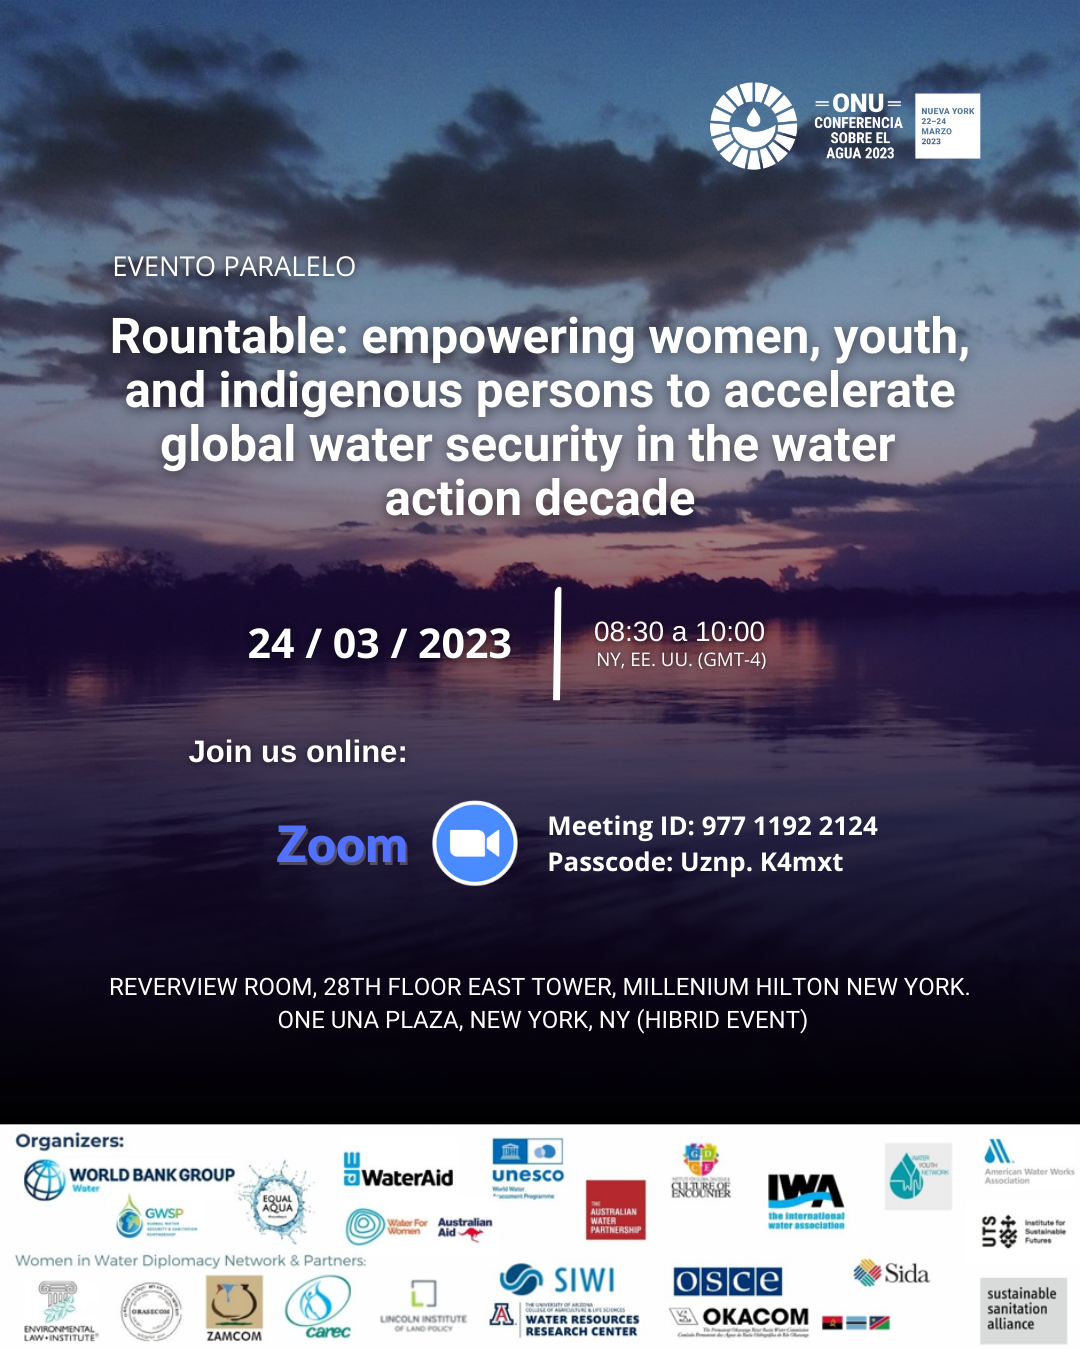 Rountable: empowering women, youth, and indigenous persons to accelerate global water security in the water action decade